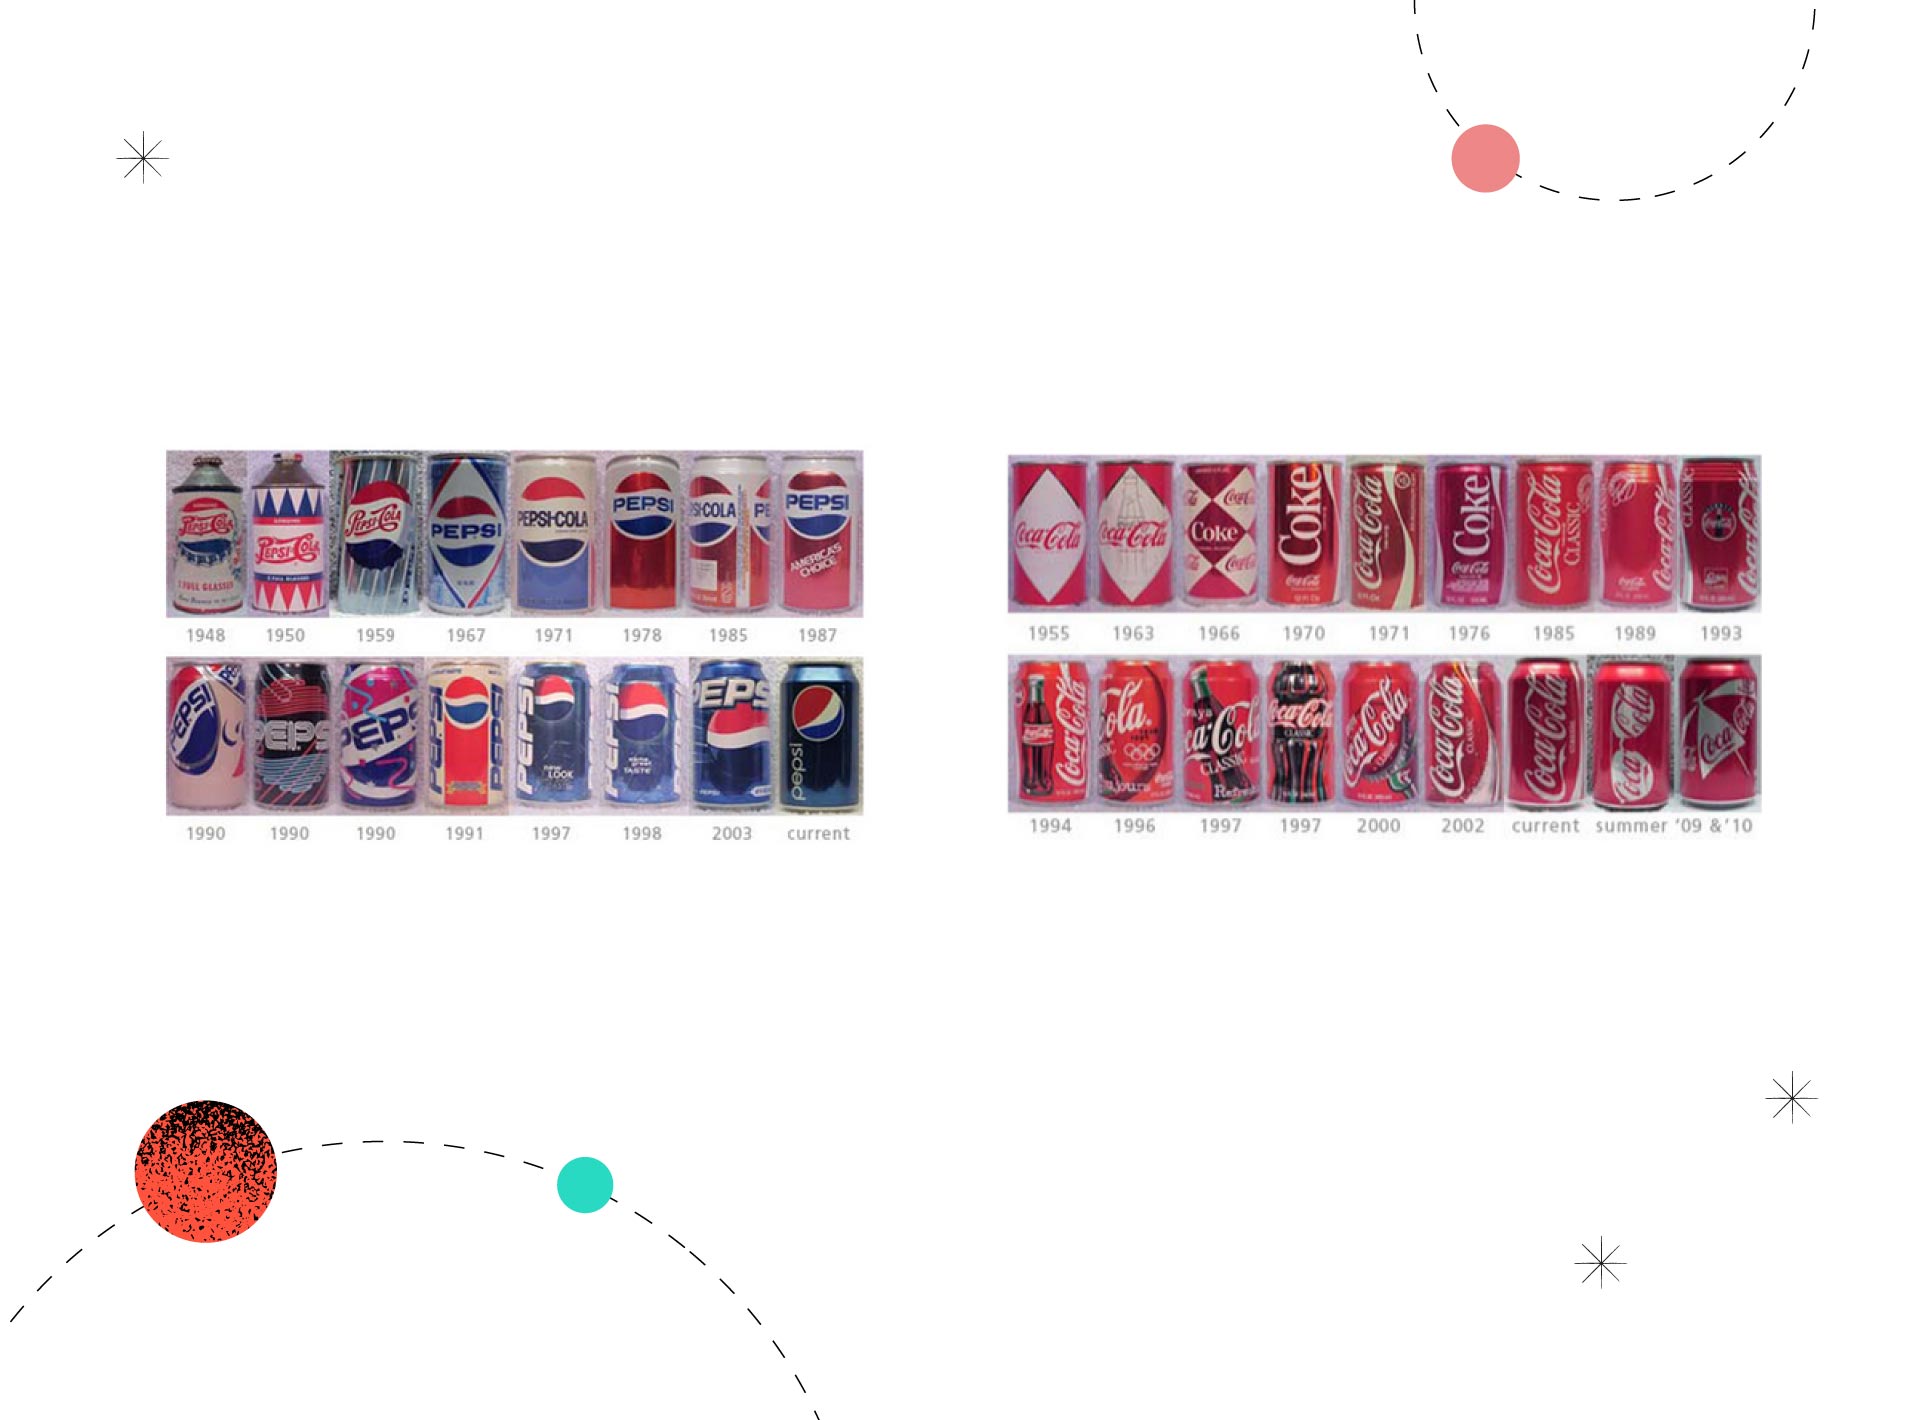 Pepsi and Coca-Cola cans through the years